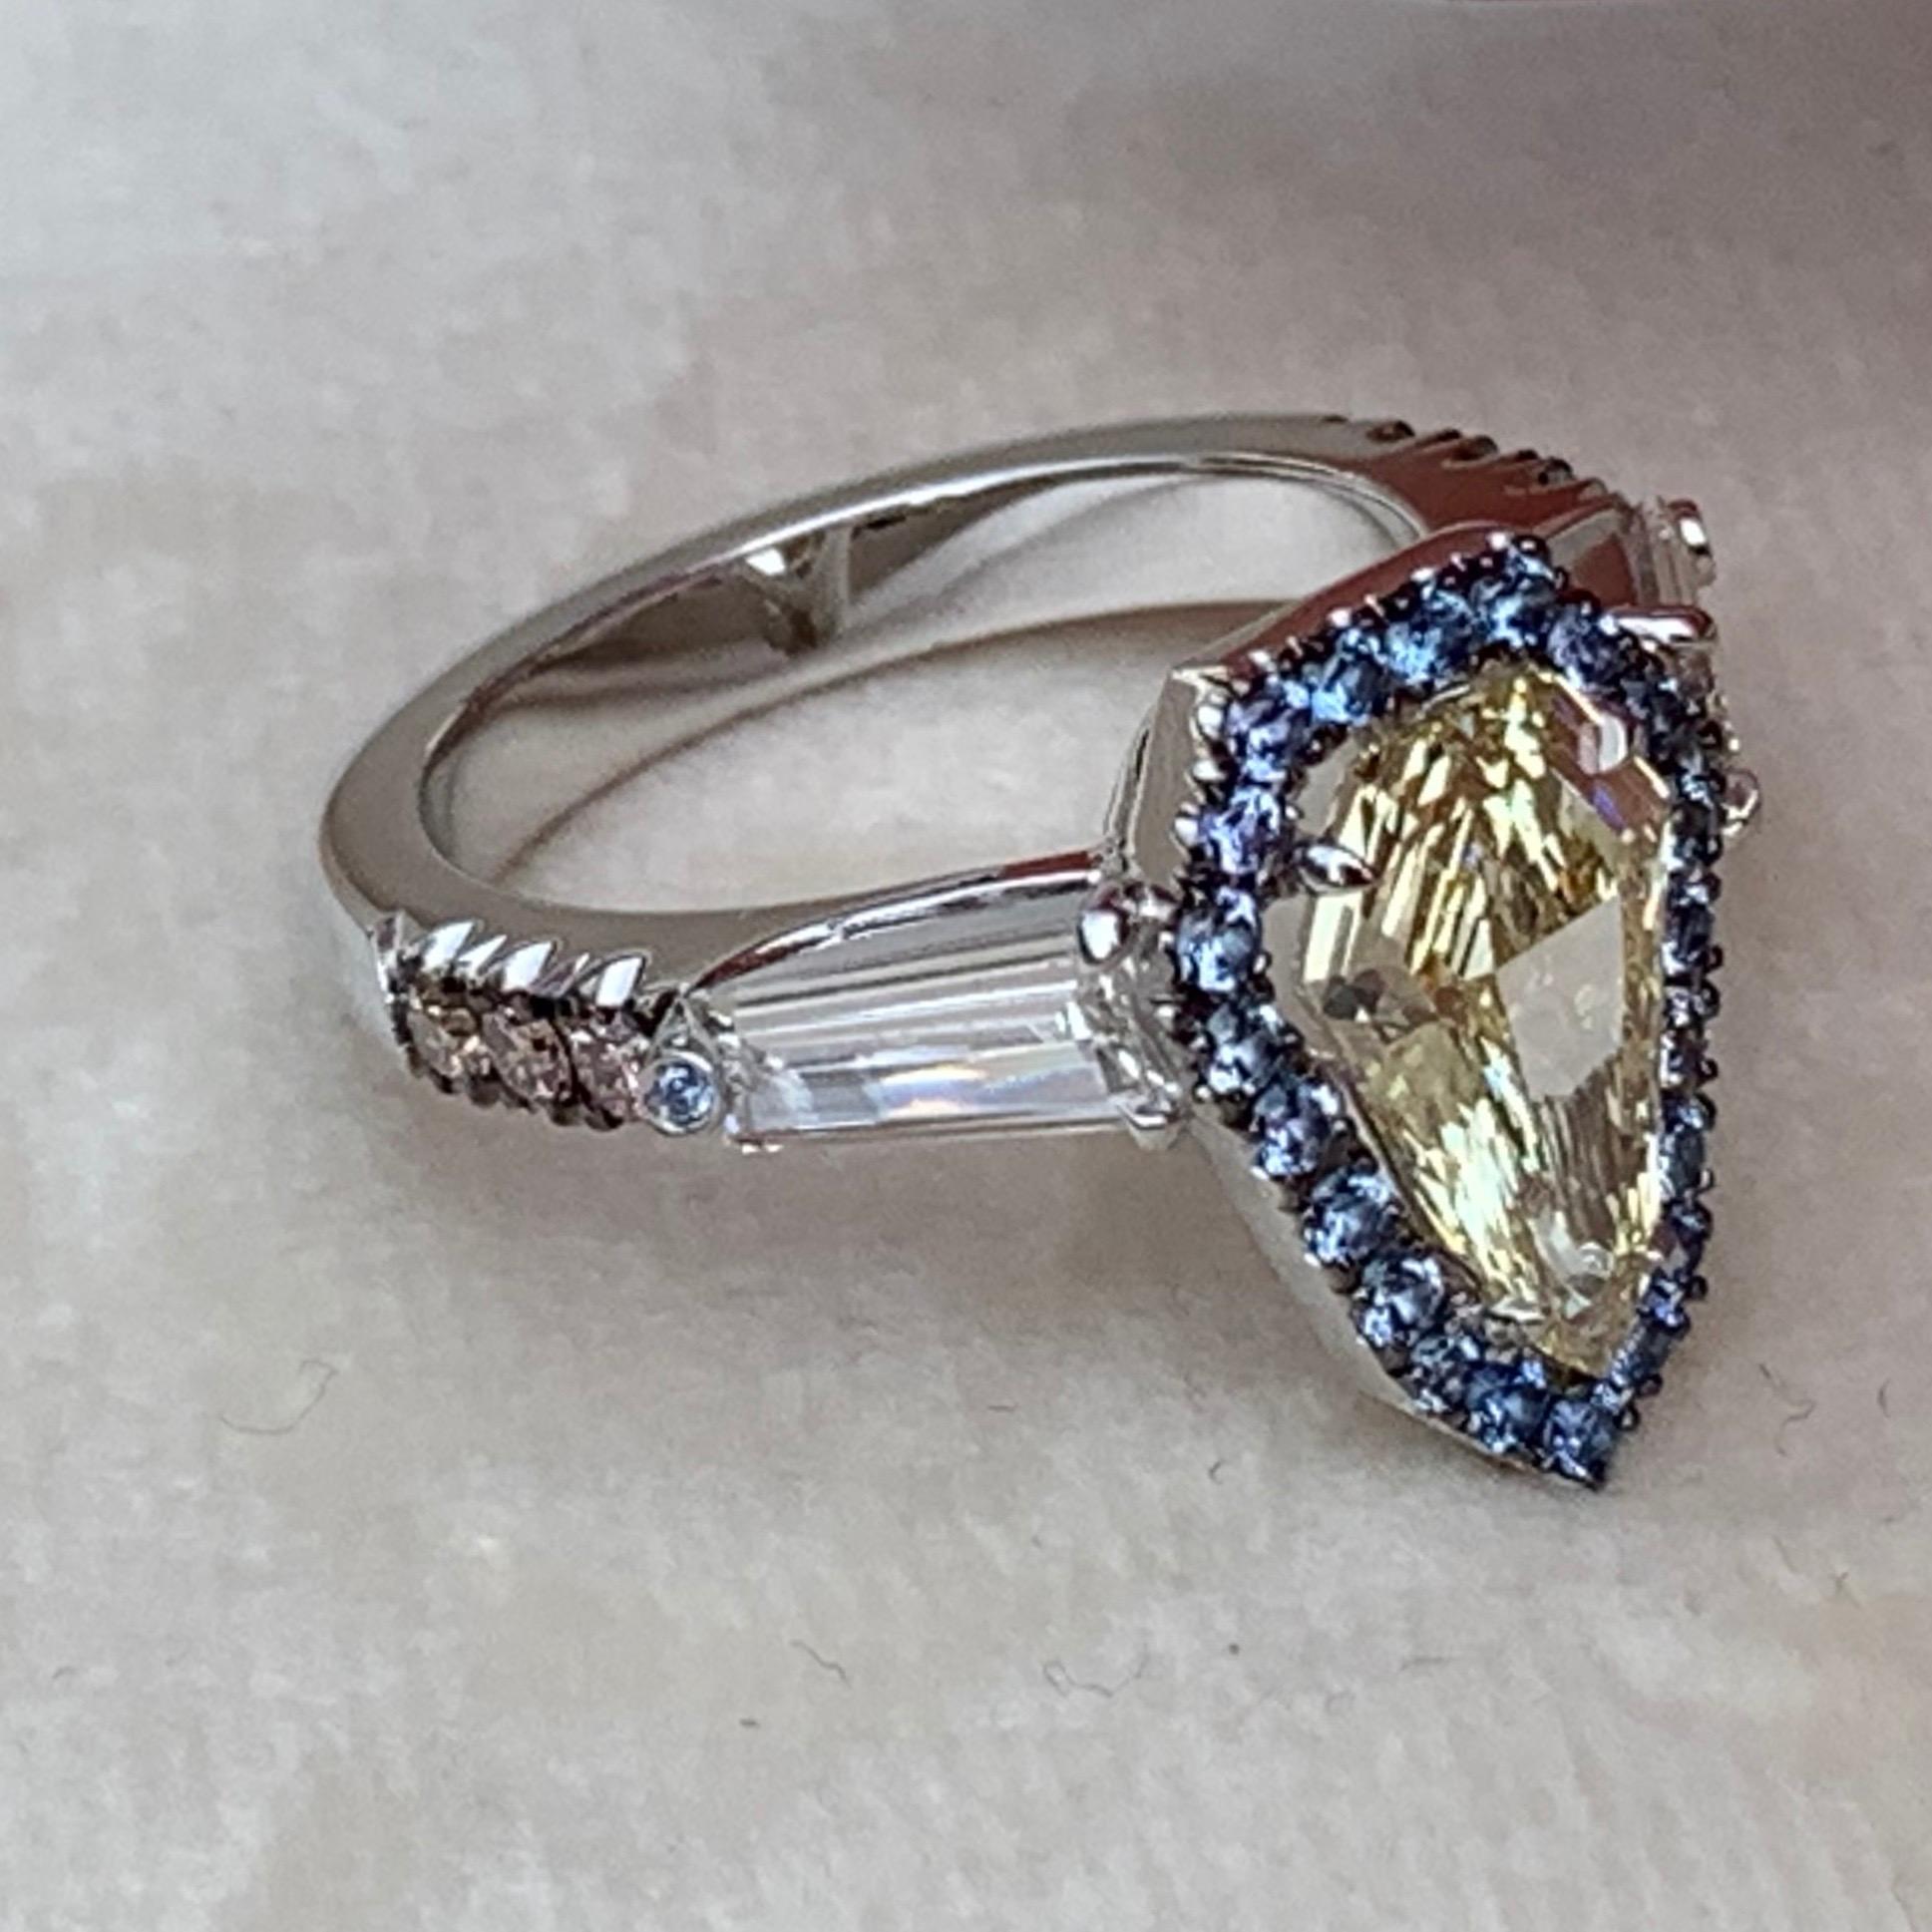 One of a kind handmade ring in 18K White gold 7,5 g. Set with a GIA certified Fancy Light Yellow Shield-Cut Diamond centerstone 1,43 carat., VVS2, Entourage pave set with Unheated Burma Blue Sapphires 0,345 ct. ( These Sapphires stay bright in the